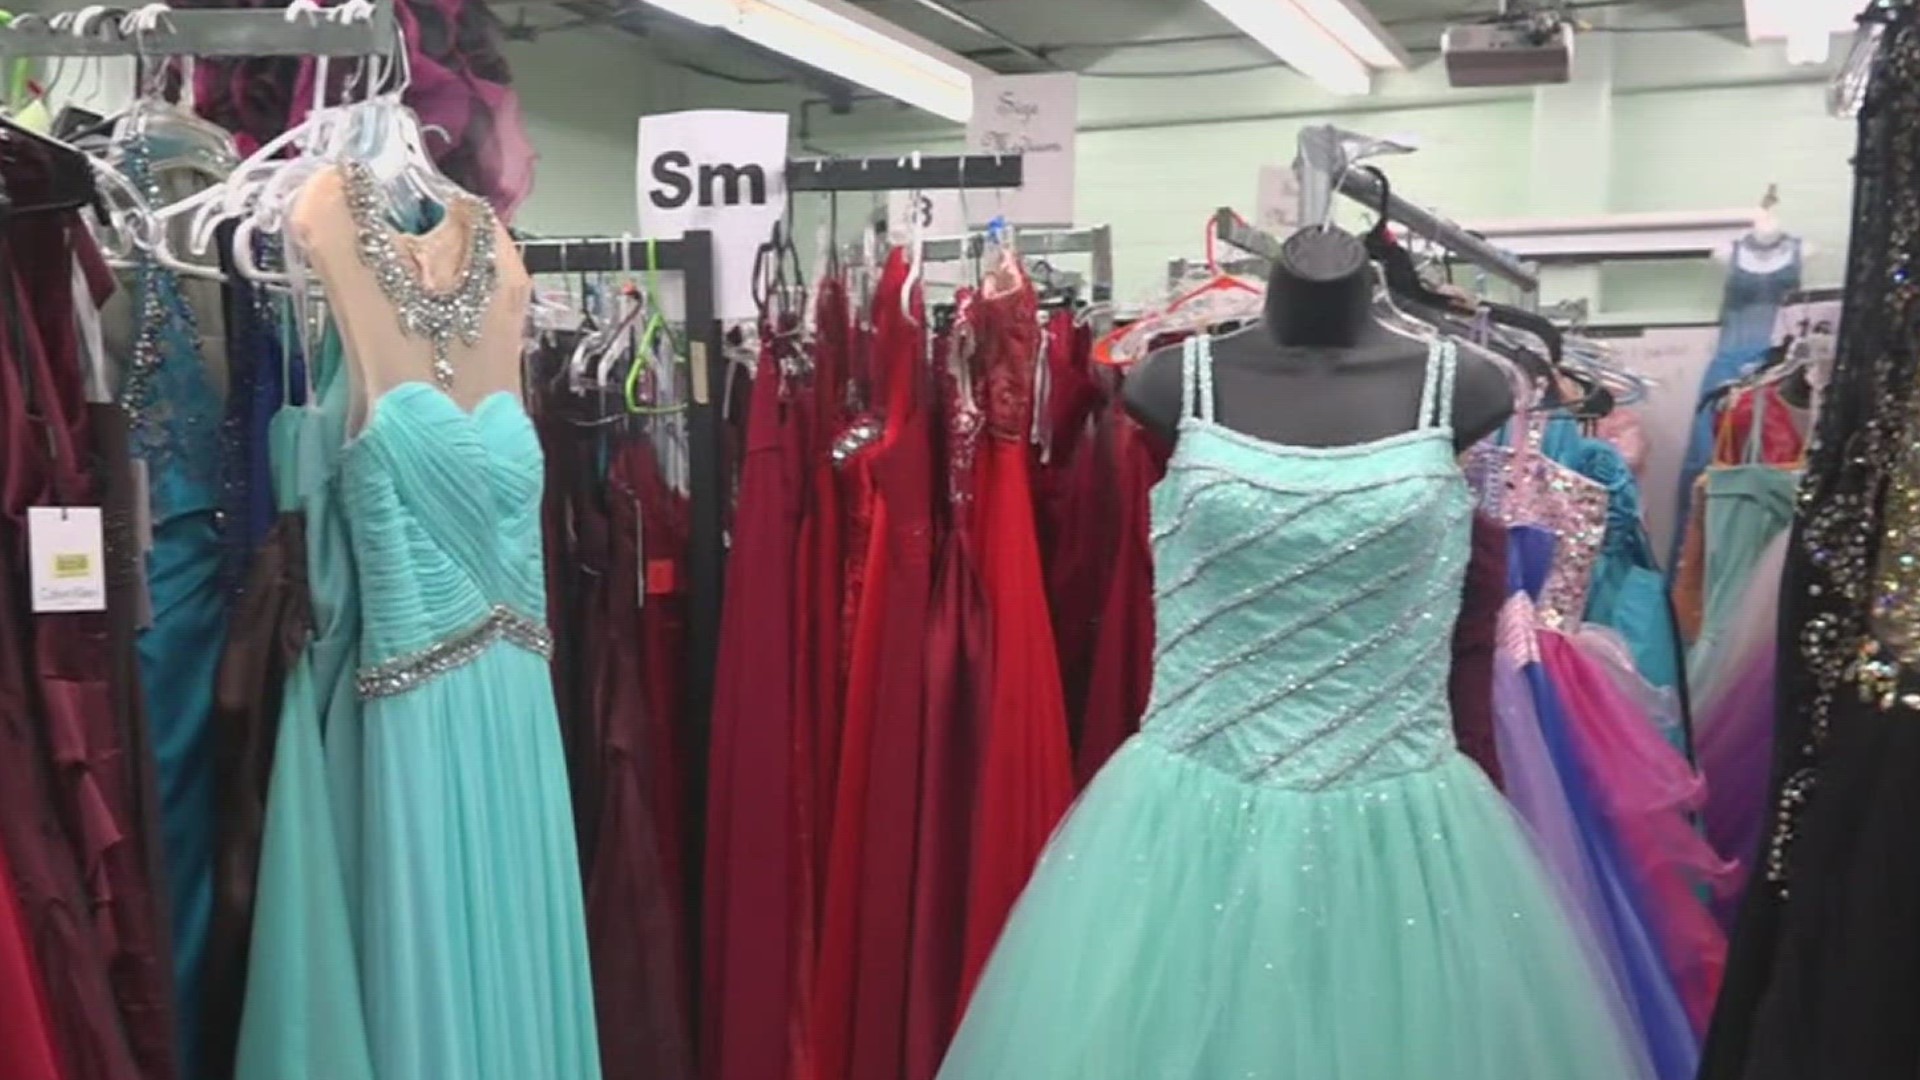 They are planning to give the prom dresses and accessories to students who can use them for free!